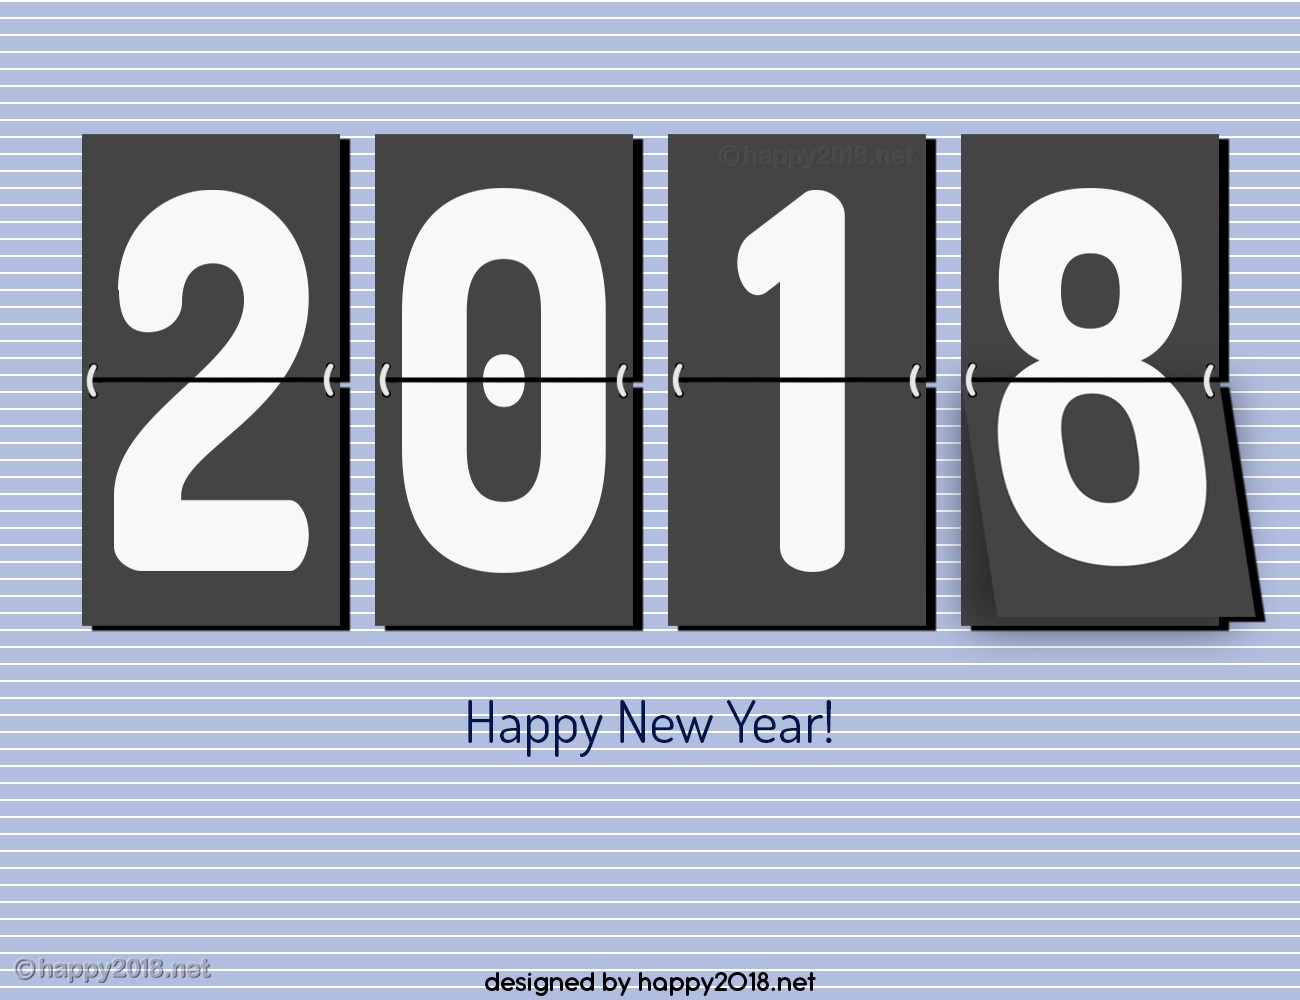 Image Greetings For Happy New Year